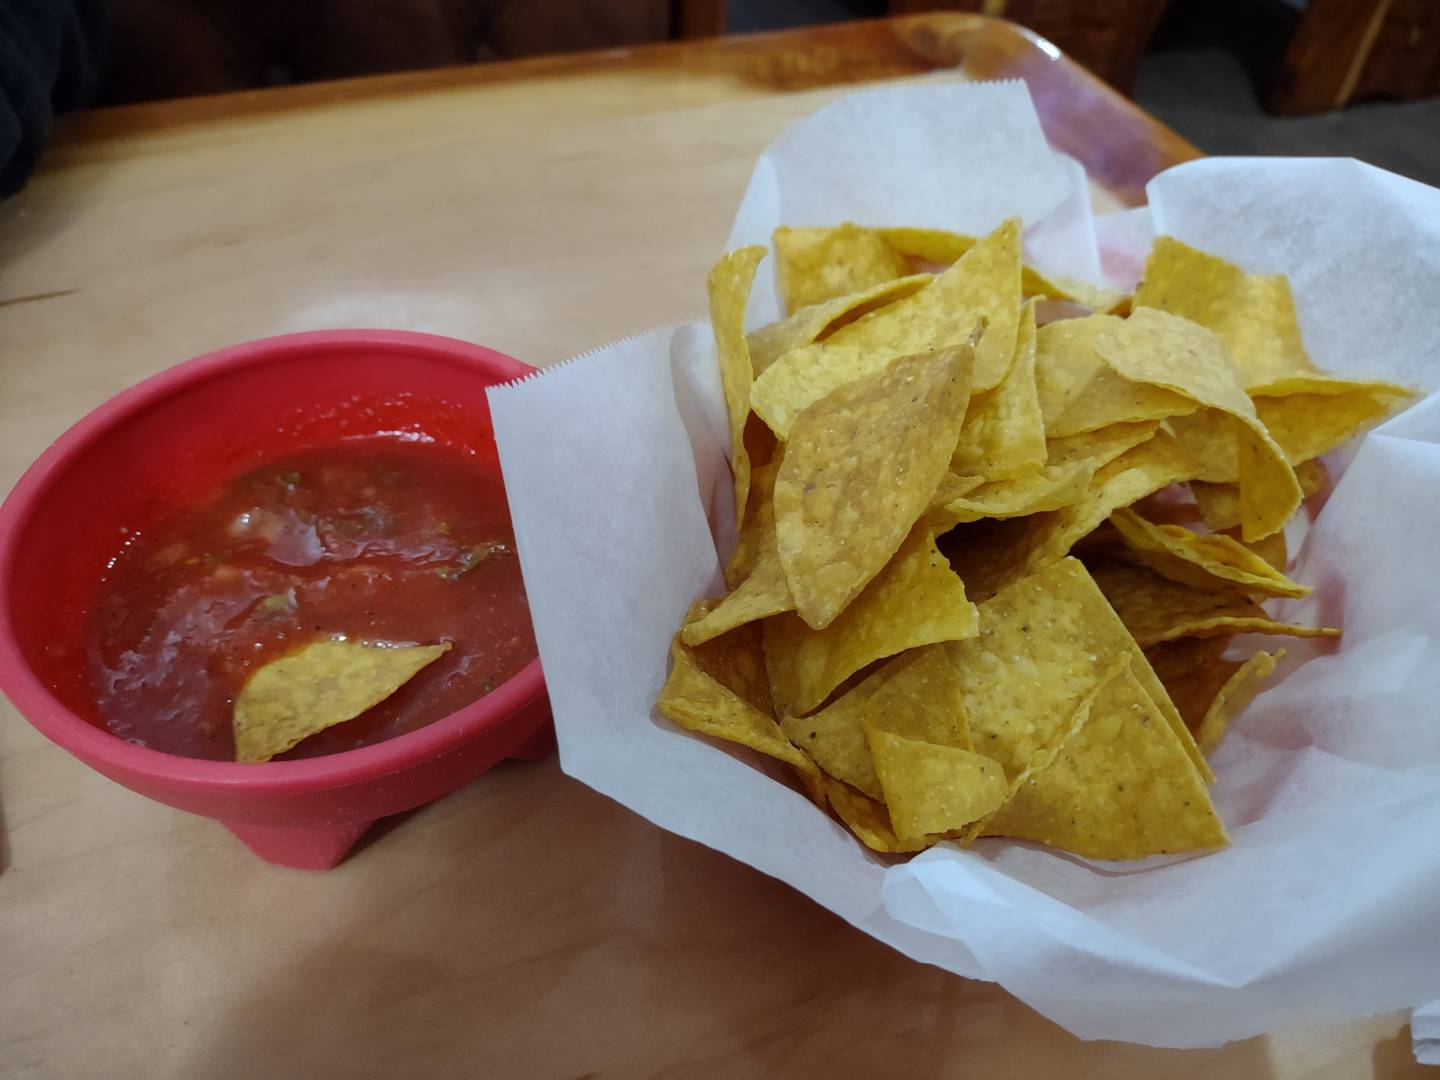 Chips and salsa are served to begin the meal at La Casa Jalisco in Streator.